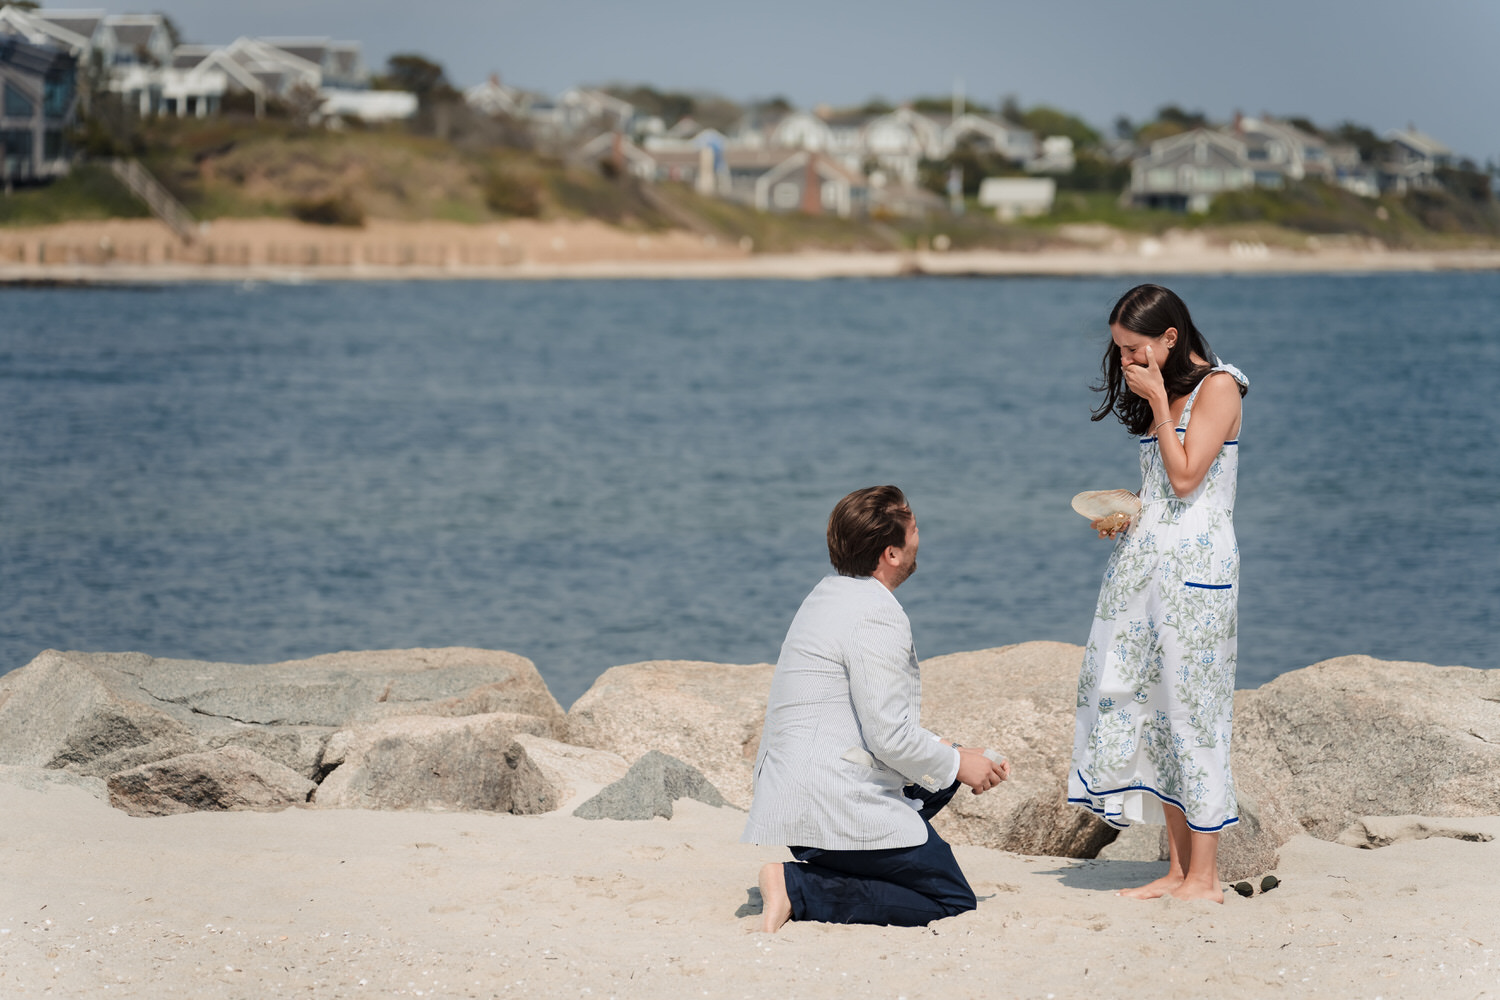 A Boston proposal photographer captures a man proposing to a woman on the beach.